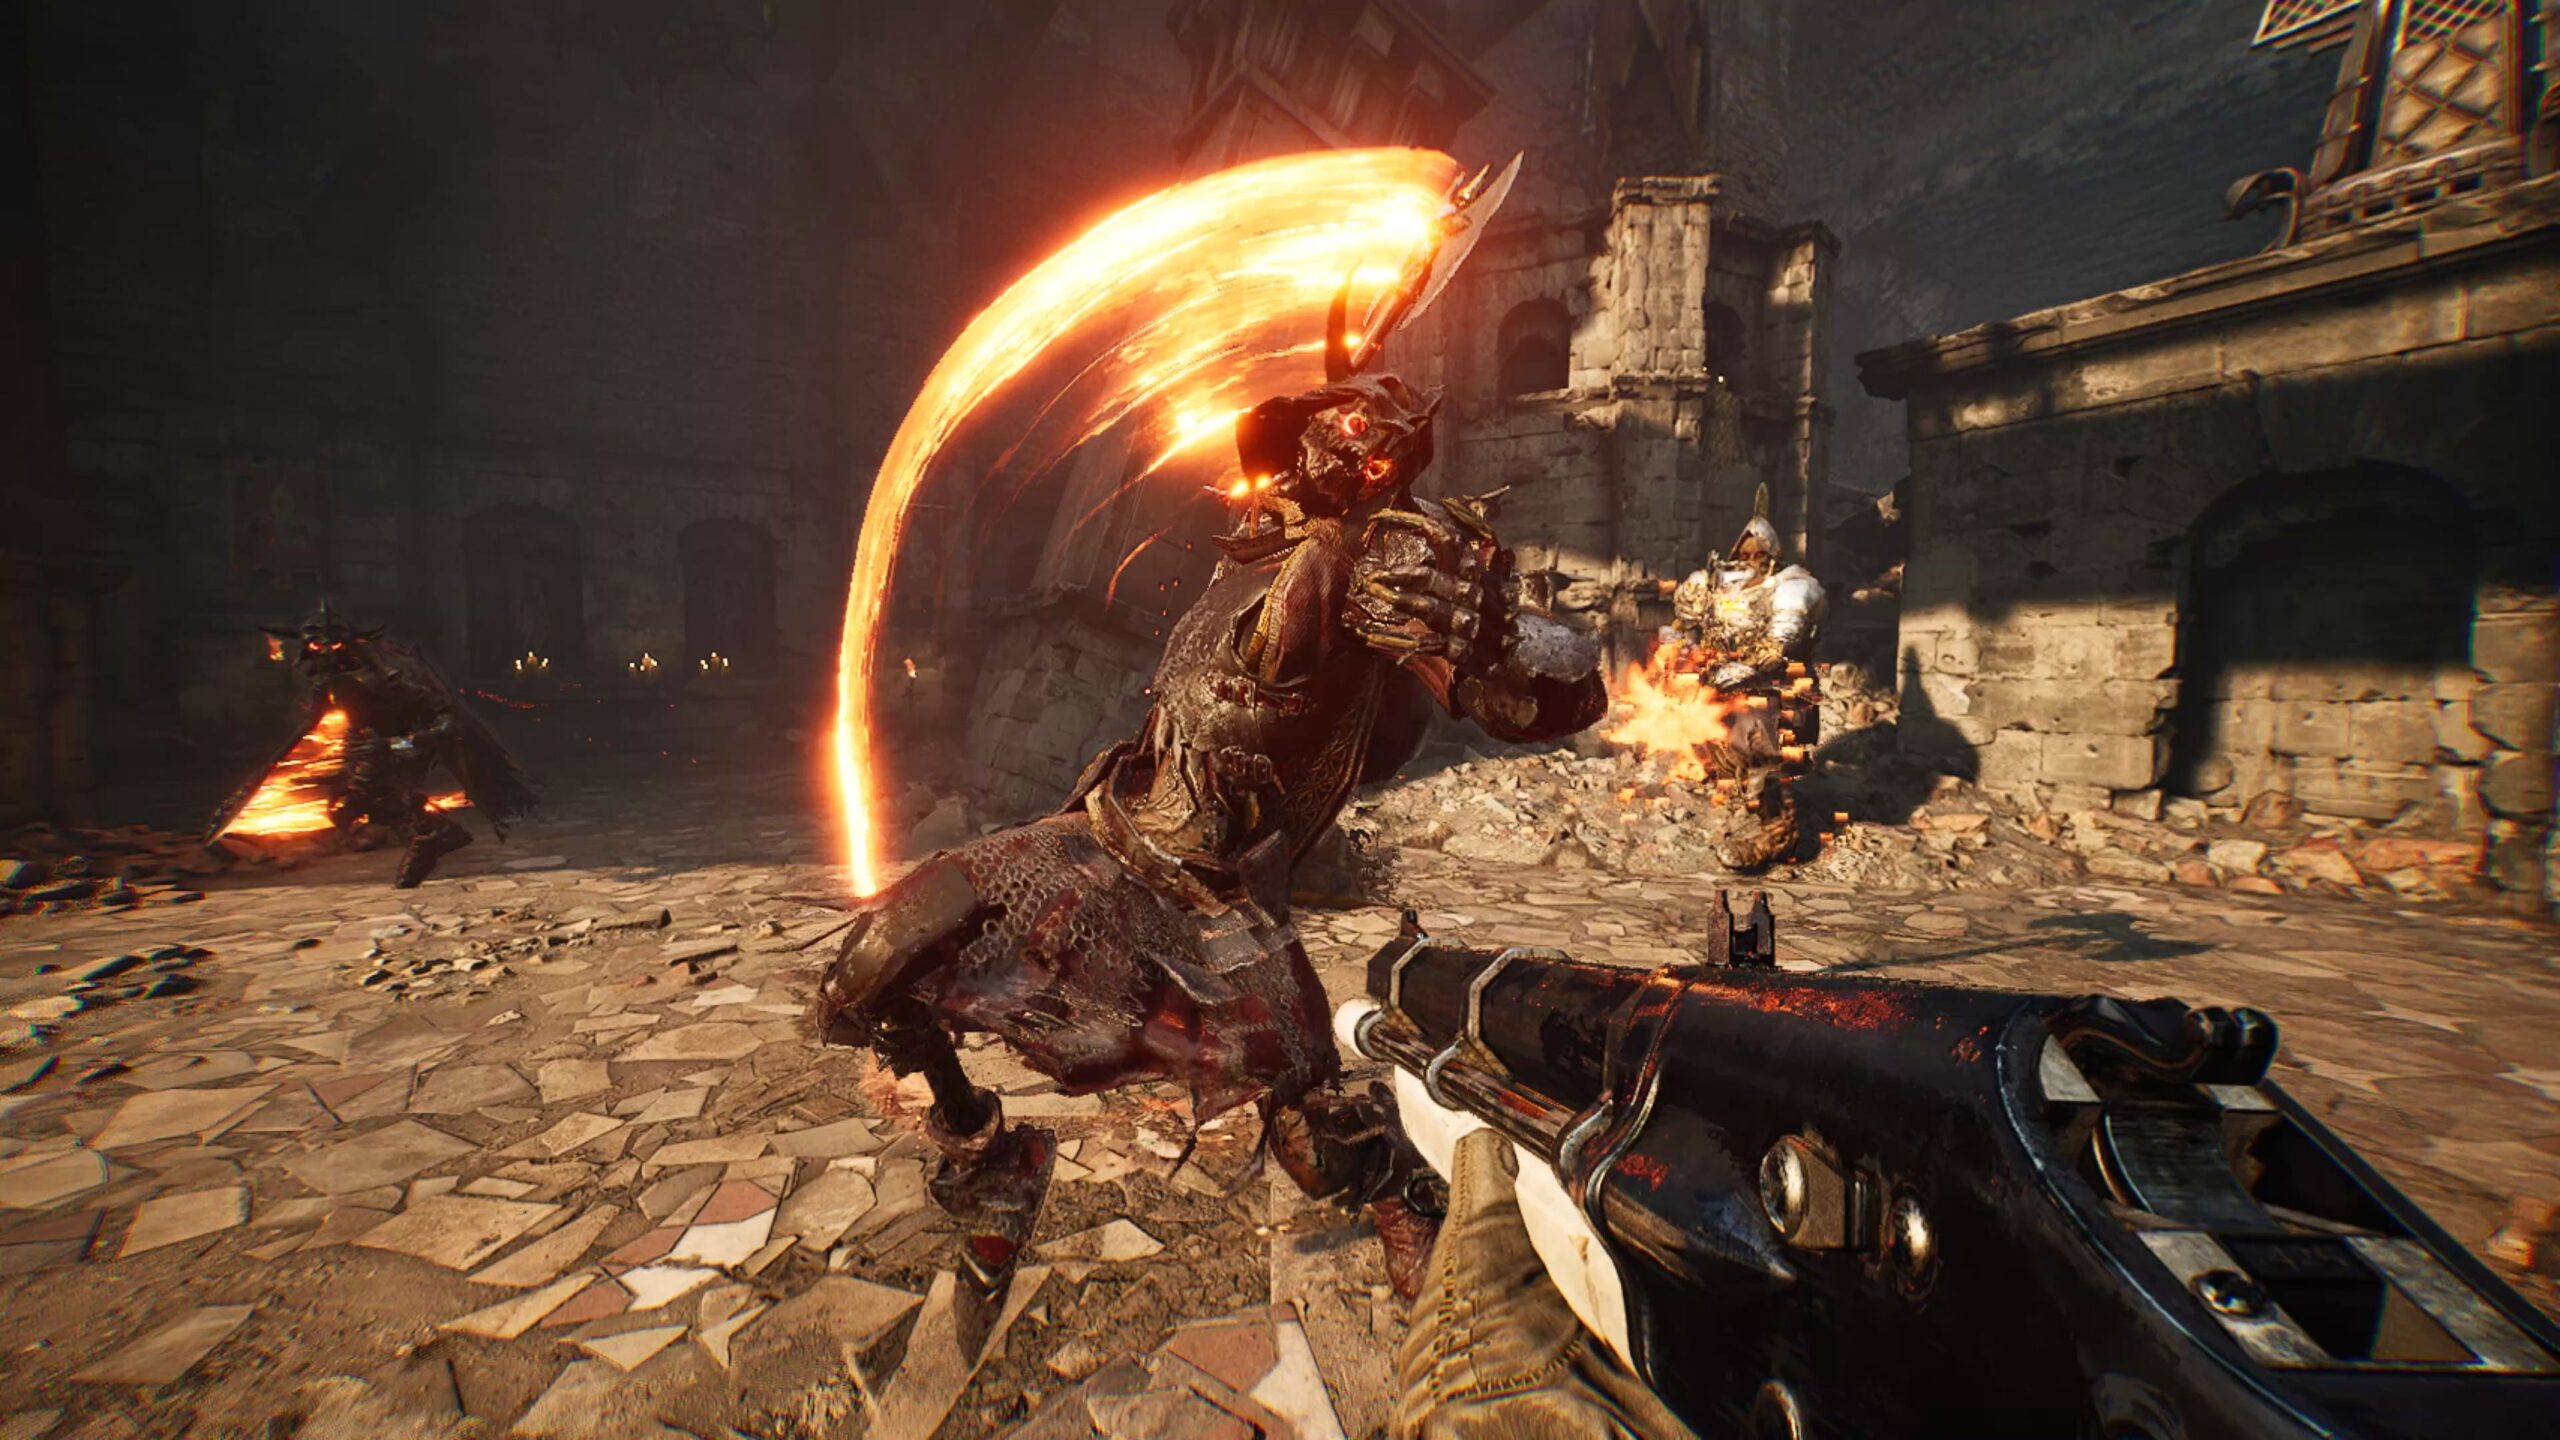 The new shooter from the makers of Bulletstorm is delayed to 2023